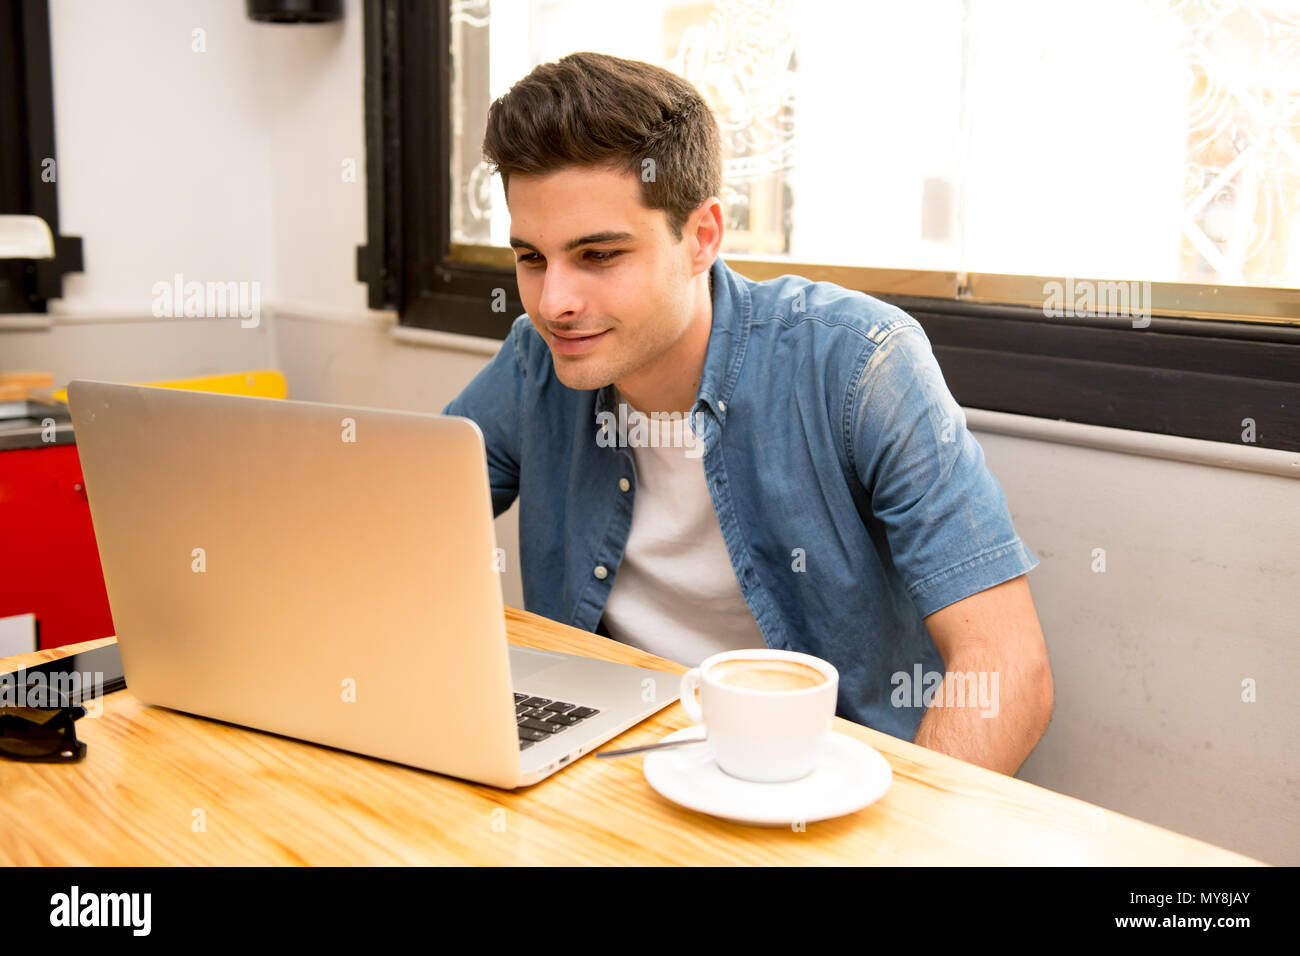 Portrait of a young caucasian man using laptop at a cafe. Causally dressed student working on computer while drinking coffee in education communicatio Stock Photo